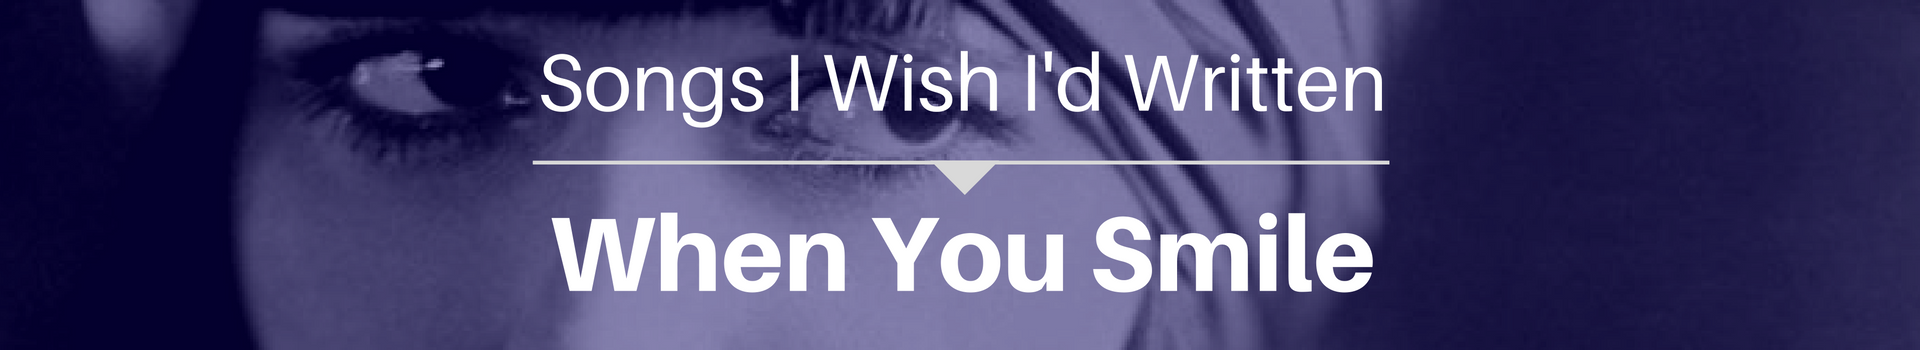 Songs I Wish I'd Written: When You Smile